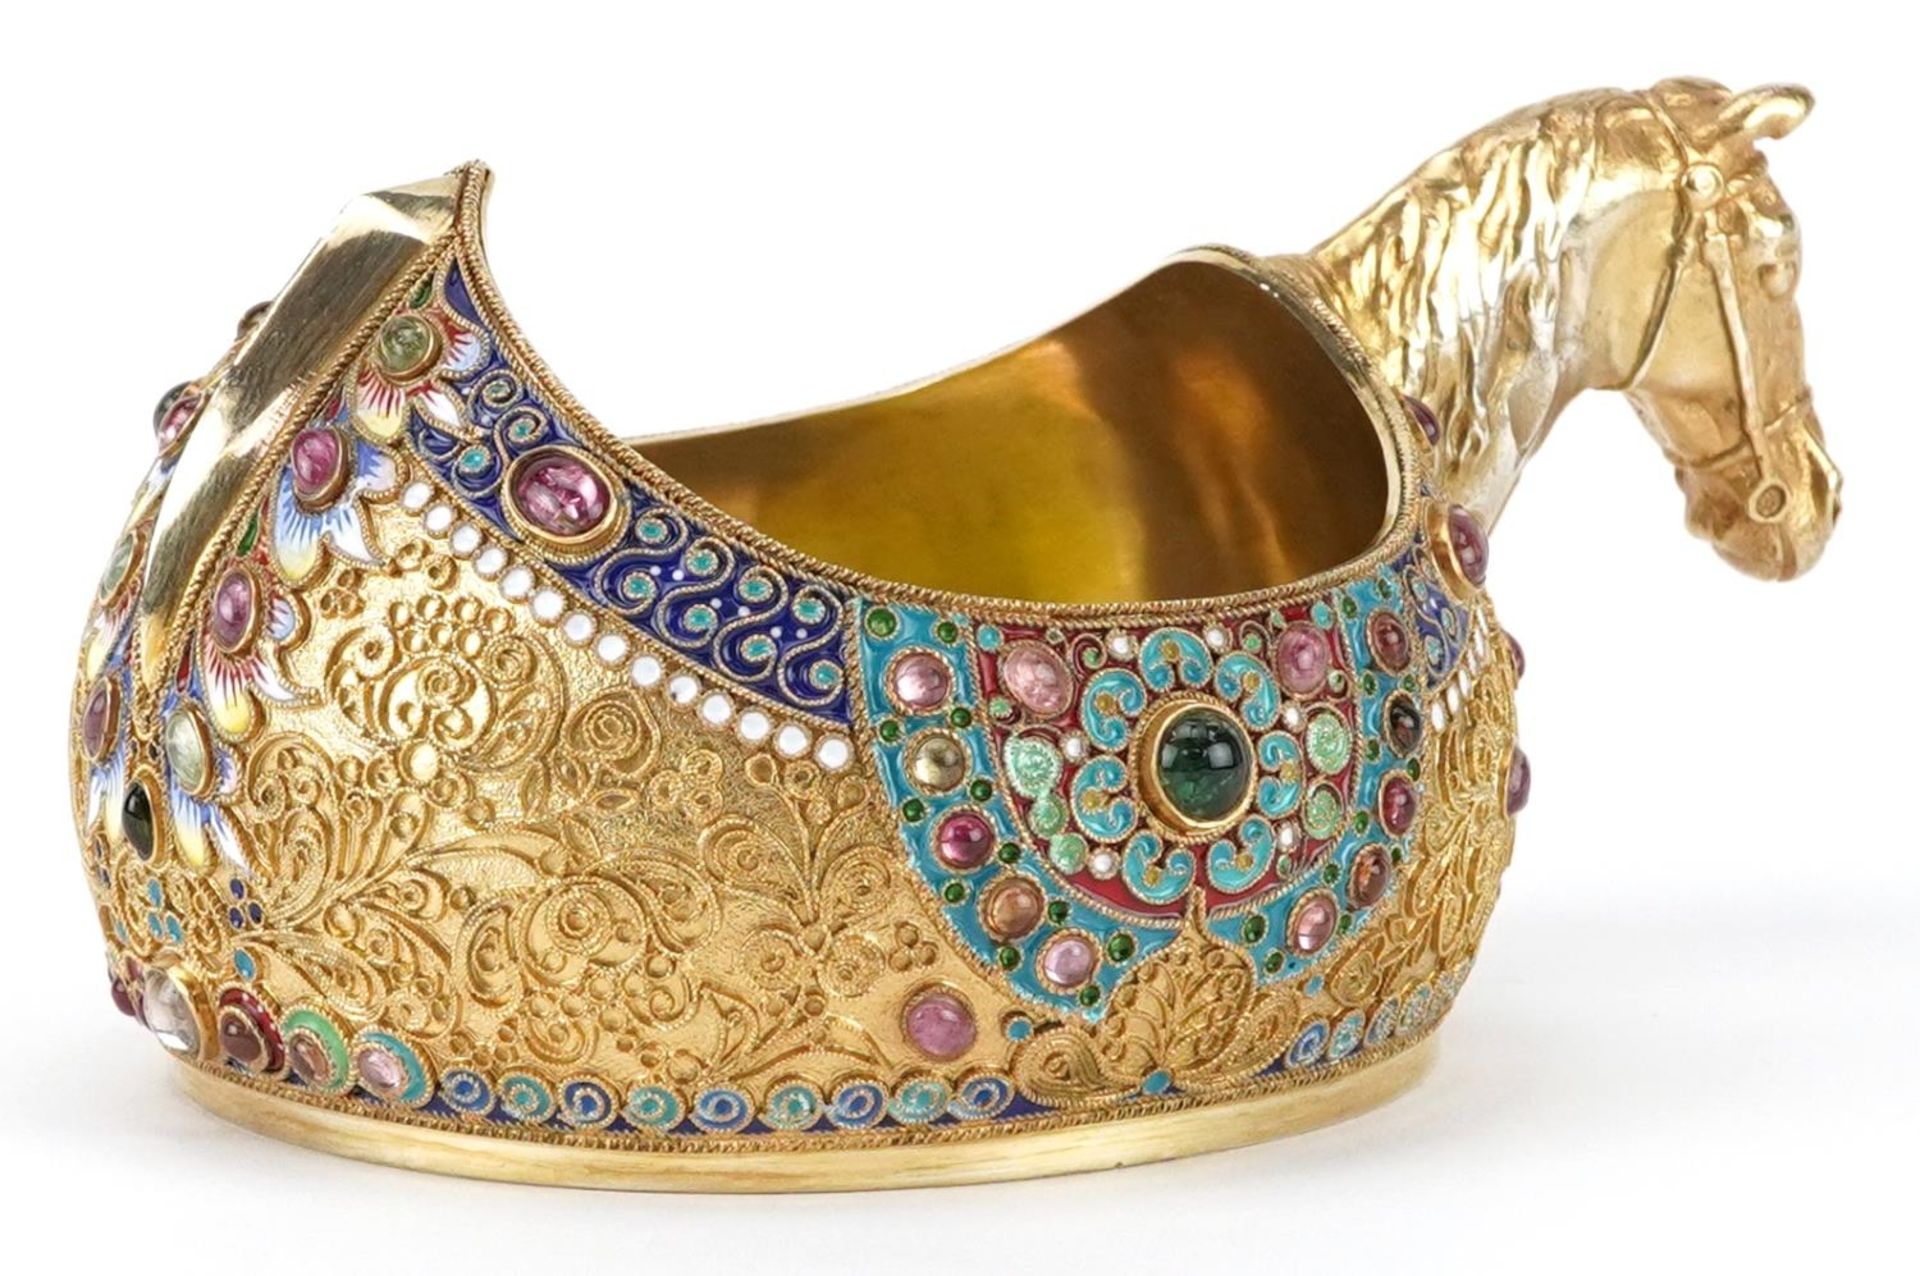 Silver gilt champleve enamel kovsh having a horsehead design handle and set with colourful - Bild 3 aus 5